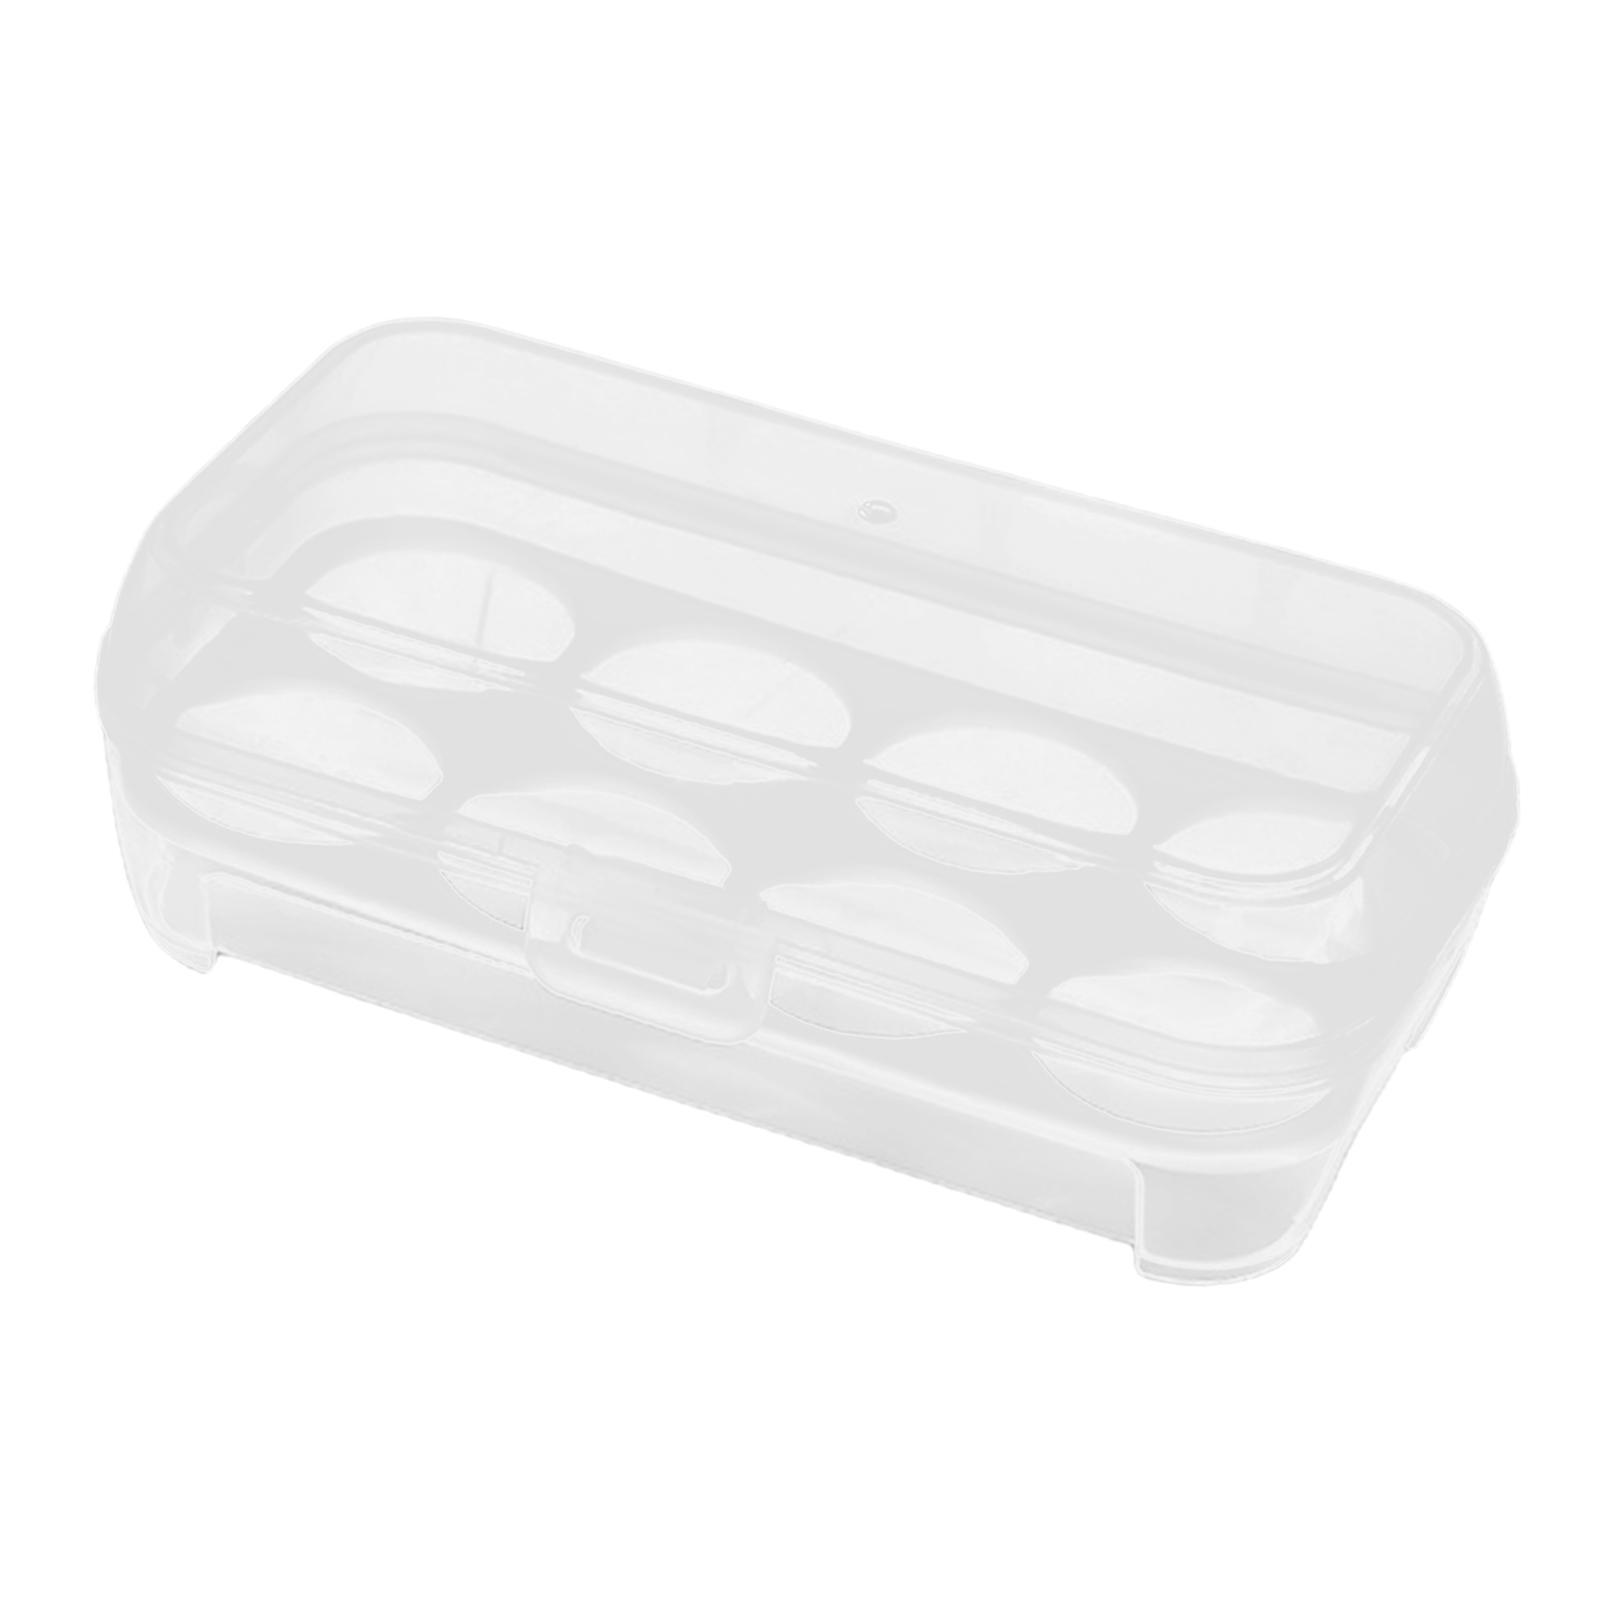 Egg Storage Box Egg Holder Tray Egg Protection Home Portable Organizer Egg Container Case for Fishing, Fresh Eggs, Refrigerator, Cooking, Travel